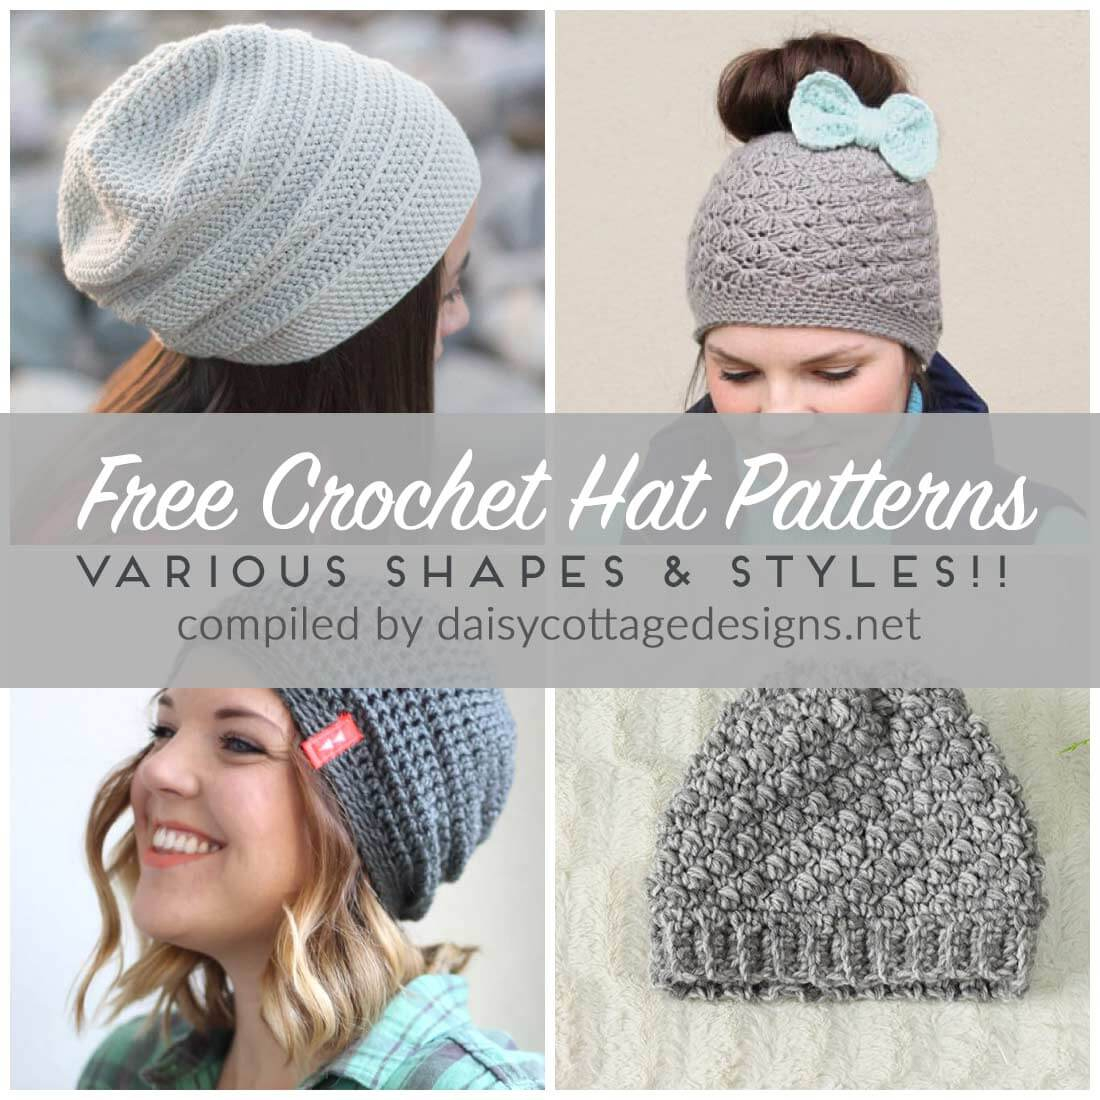 Crochet For Beginners Patterns Free Free Crochet Hat Patterns Daisy Cottage Designs